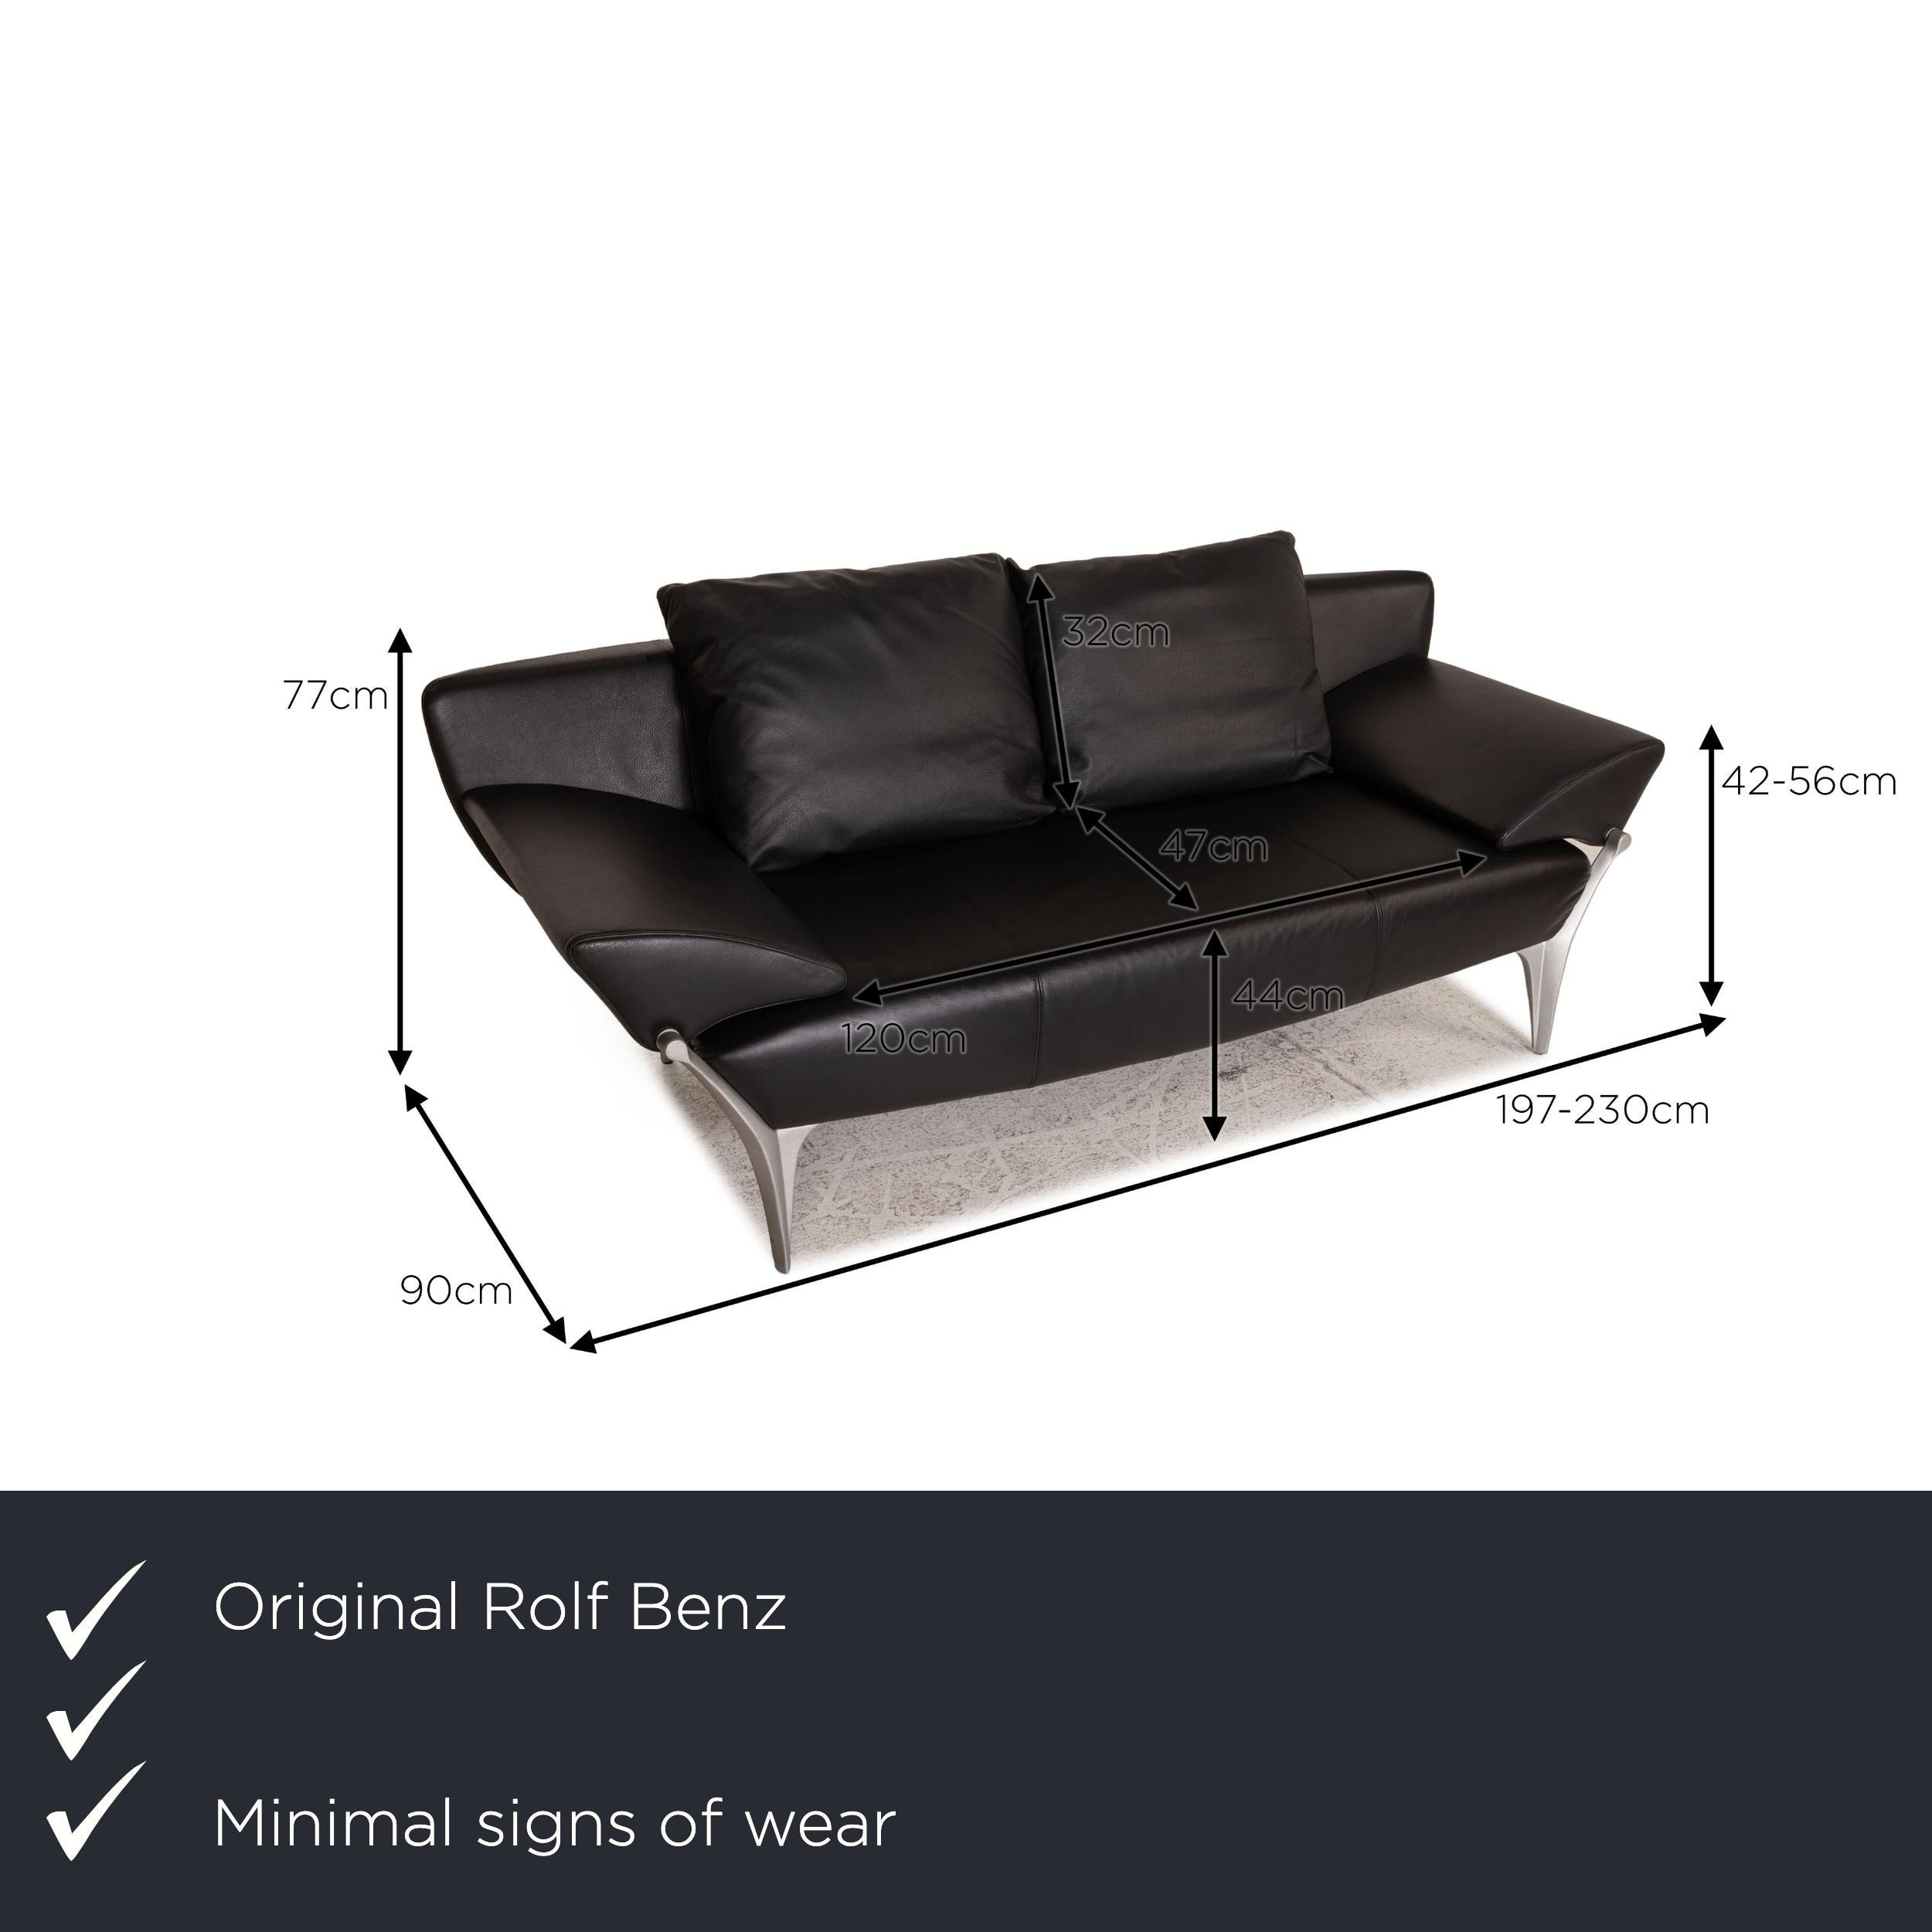 We present to you a Rolf Benz 1600 leather sofa black two-seater couch function.

Product measurements in centimeters:

depth: 90
width: 197
height: 77
seat height: 44
rest height: 42
seat depth: 47
seat width: 120
back height: 32.

 